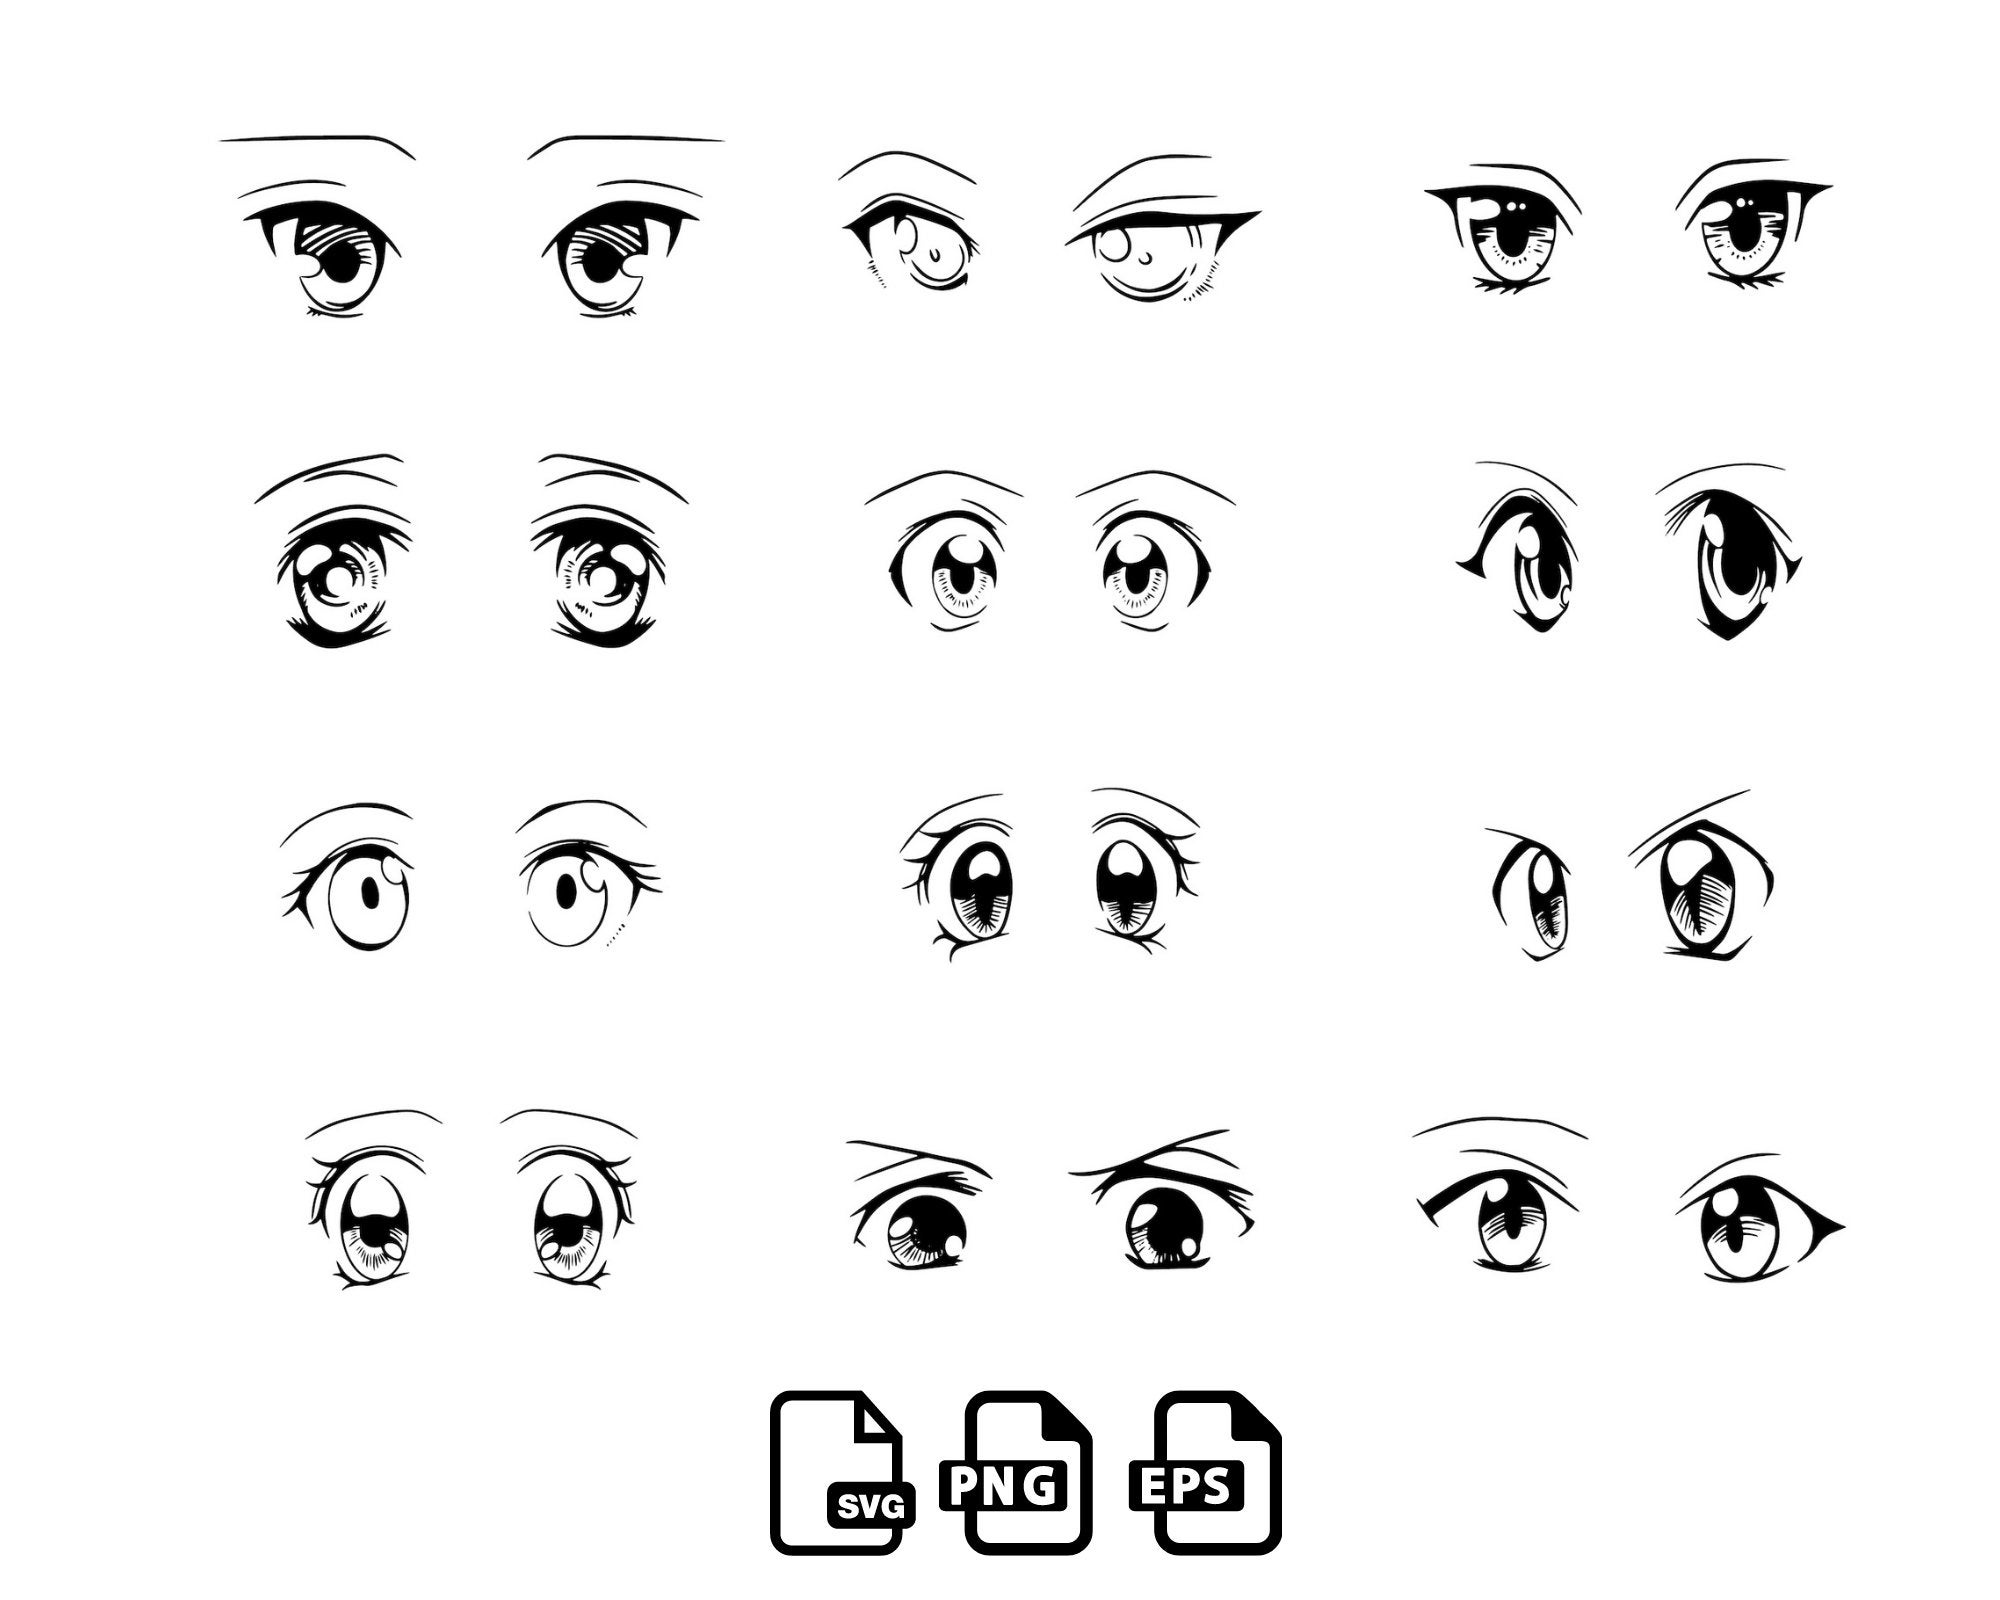 Agshowsnsw | How to draw anime eyes easy tutorial